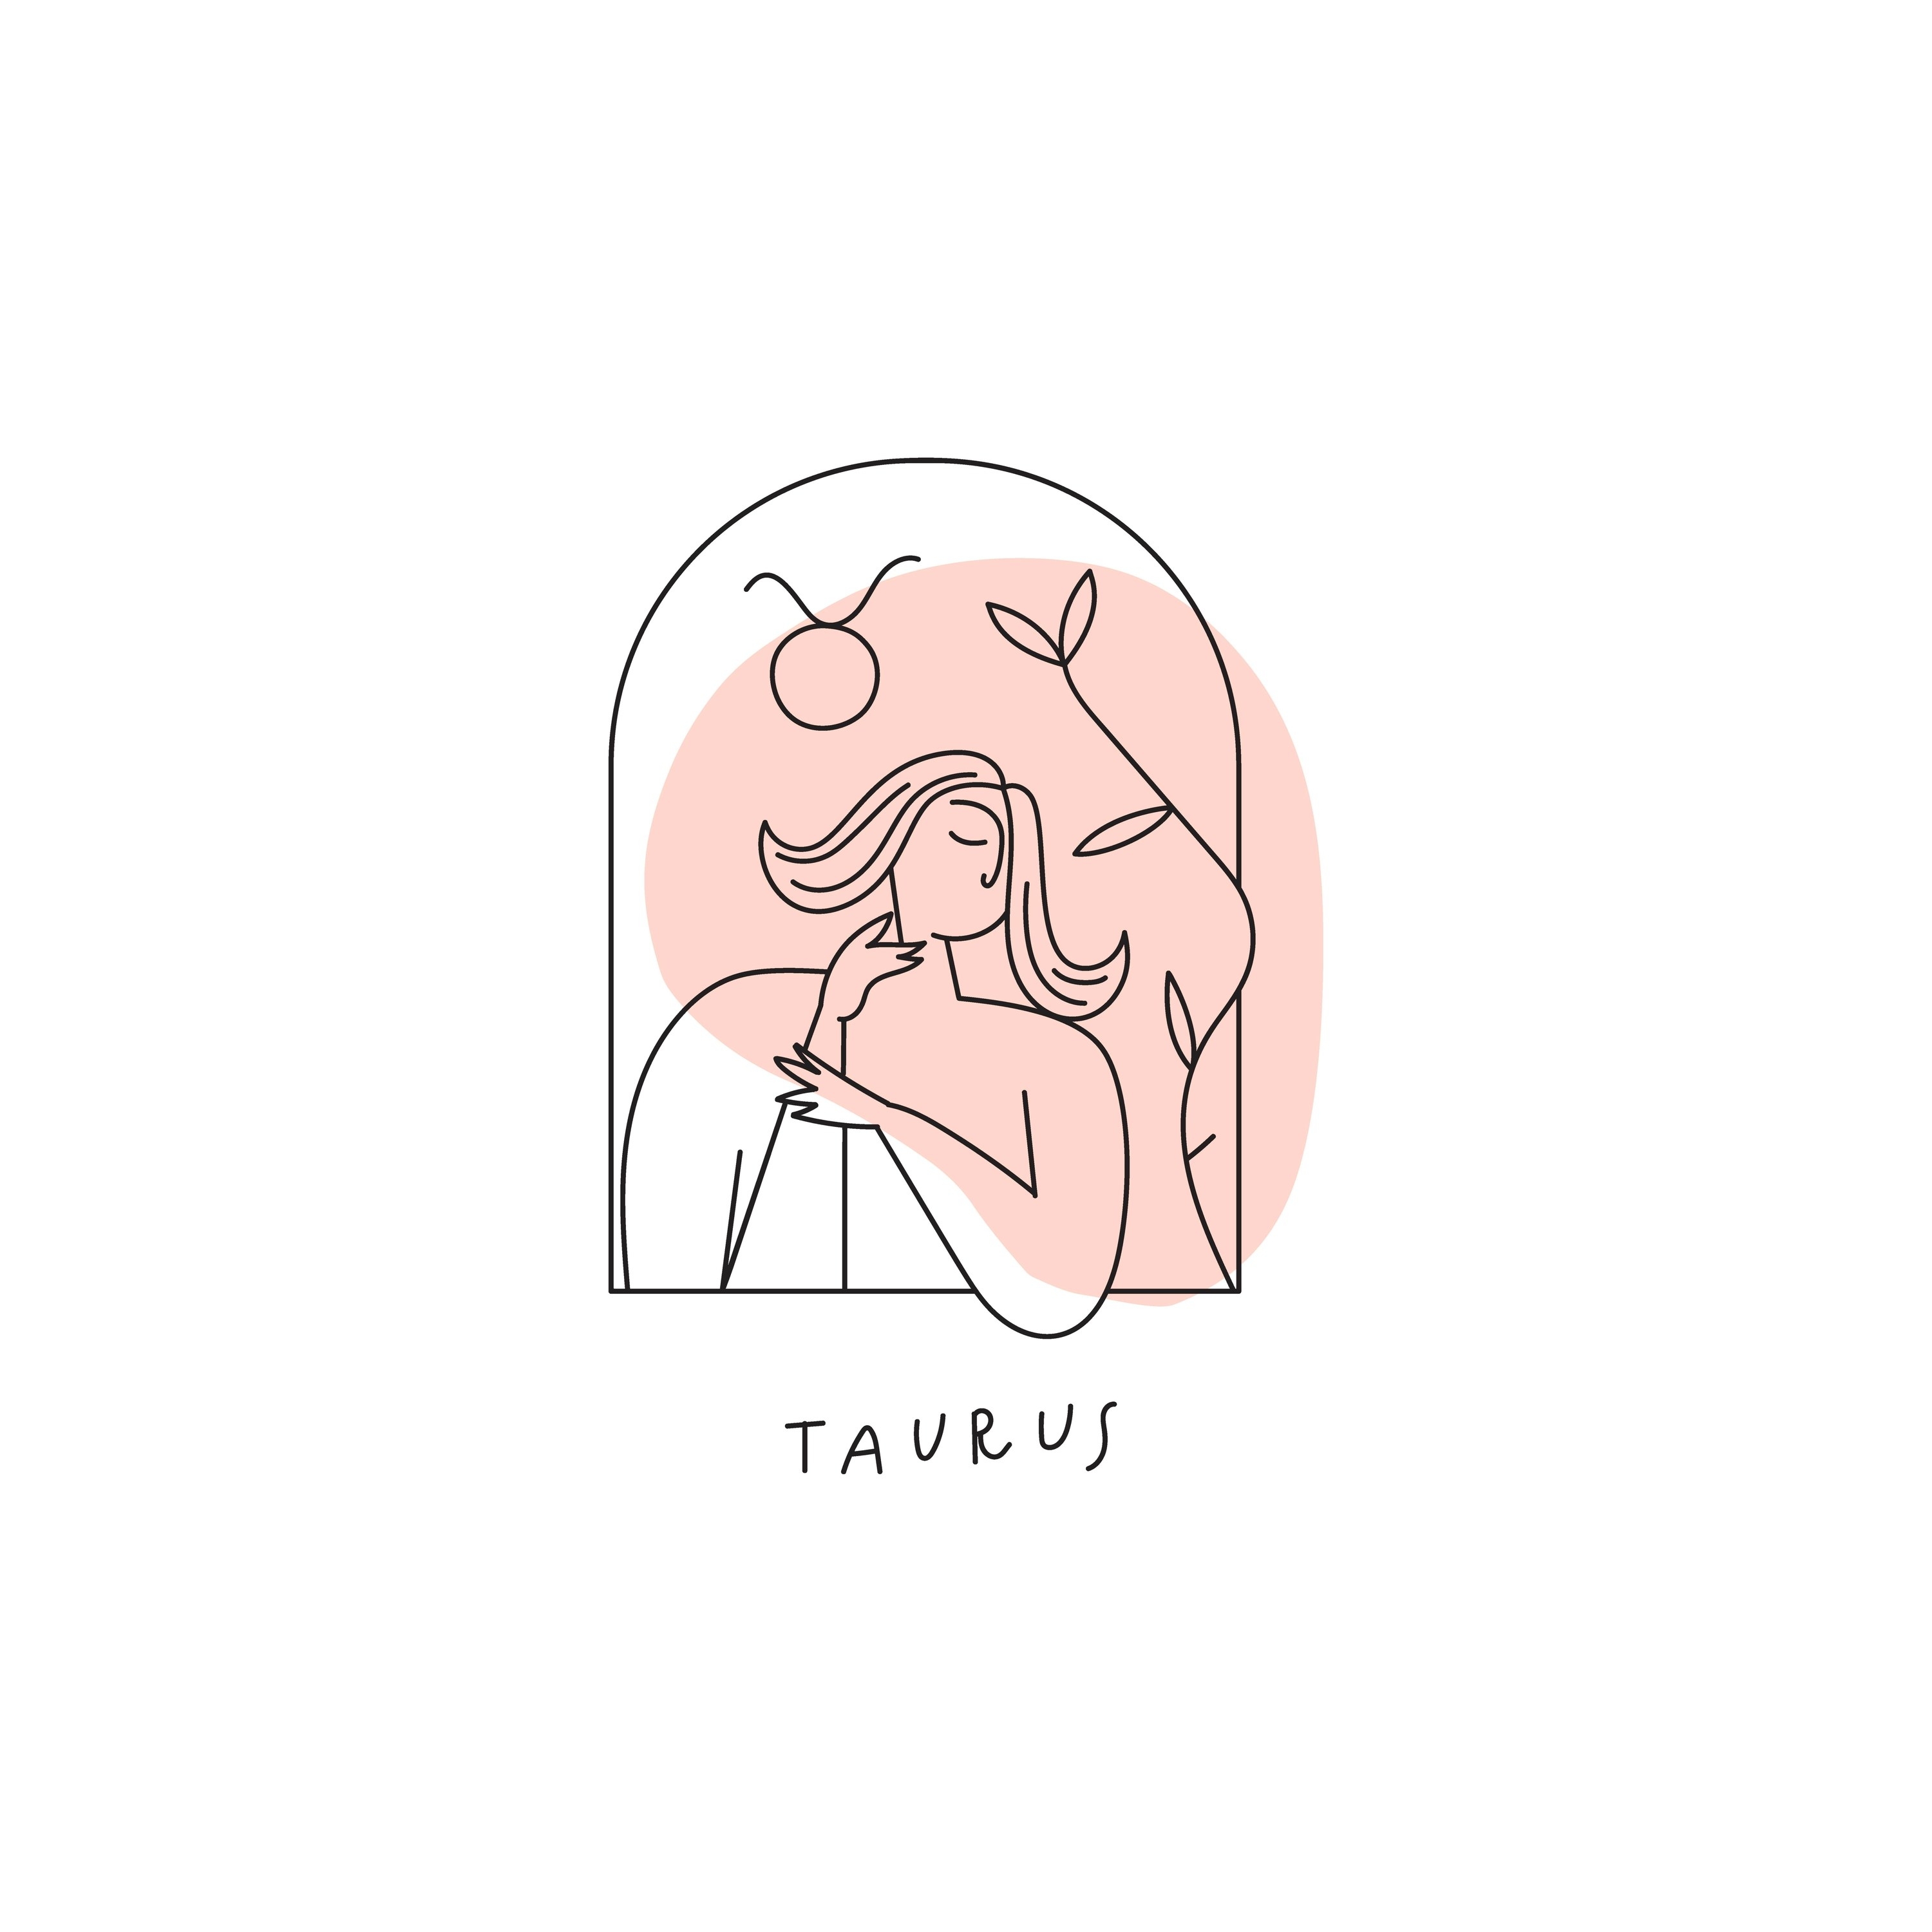 Taurus zodiac sign illustration with pink watercolor